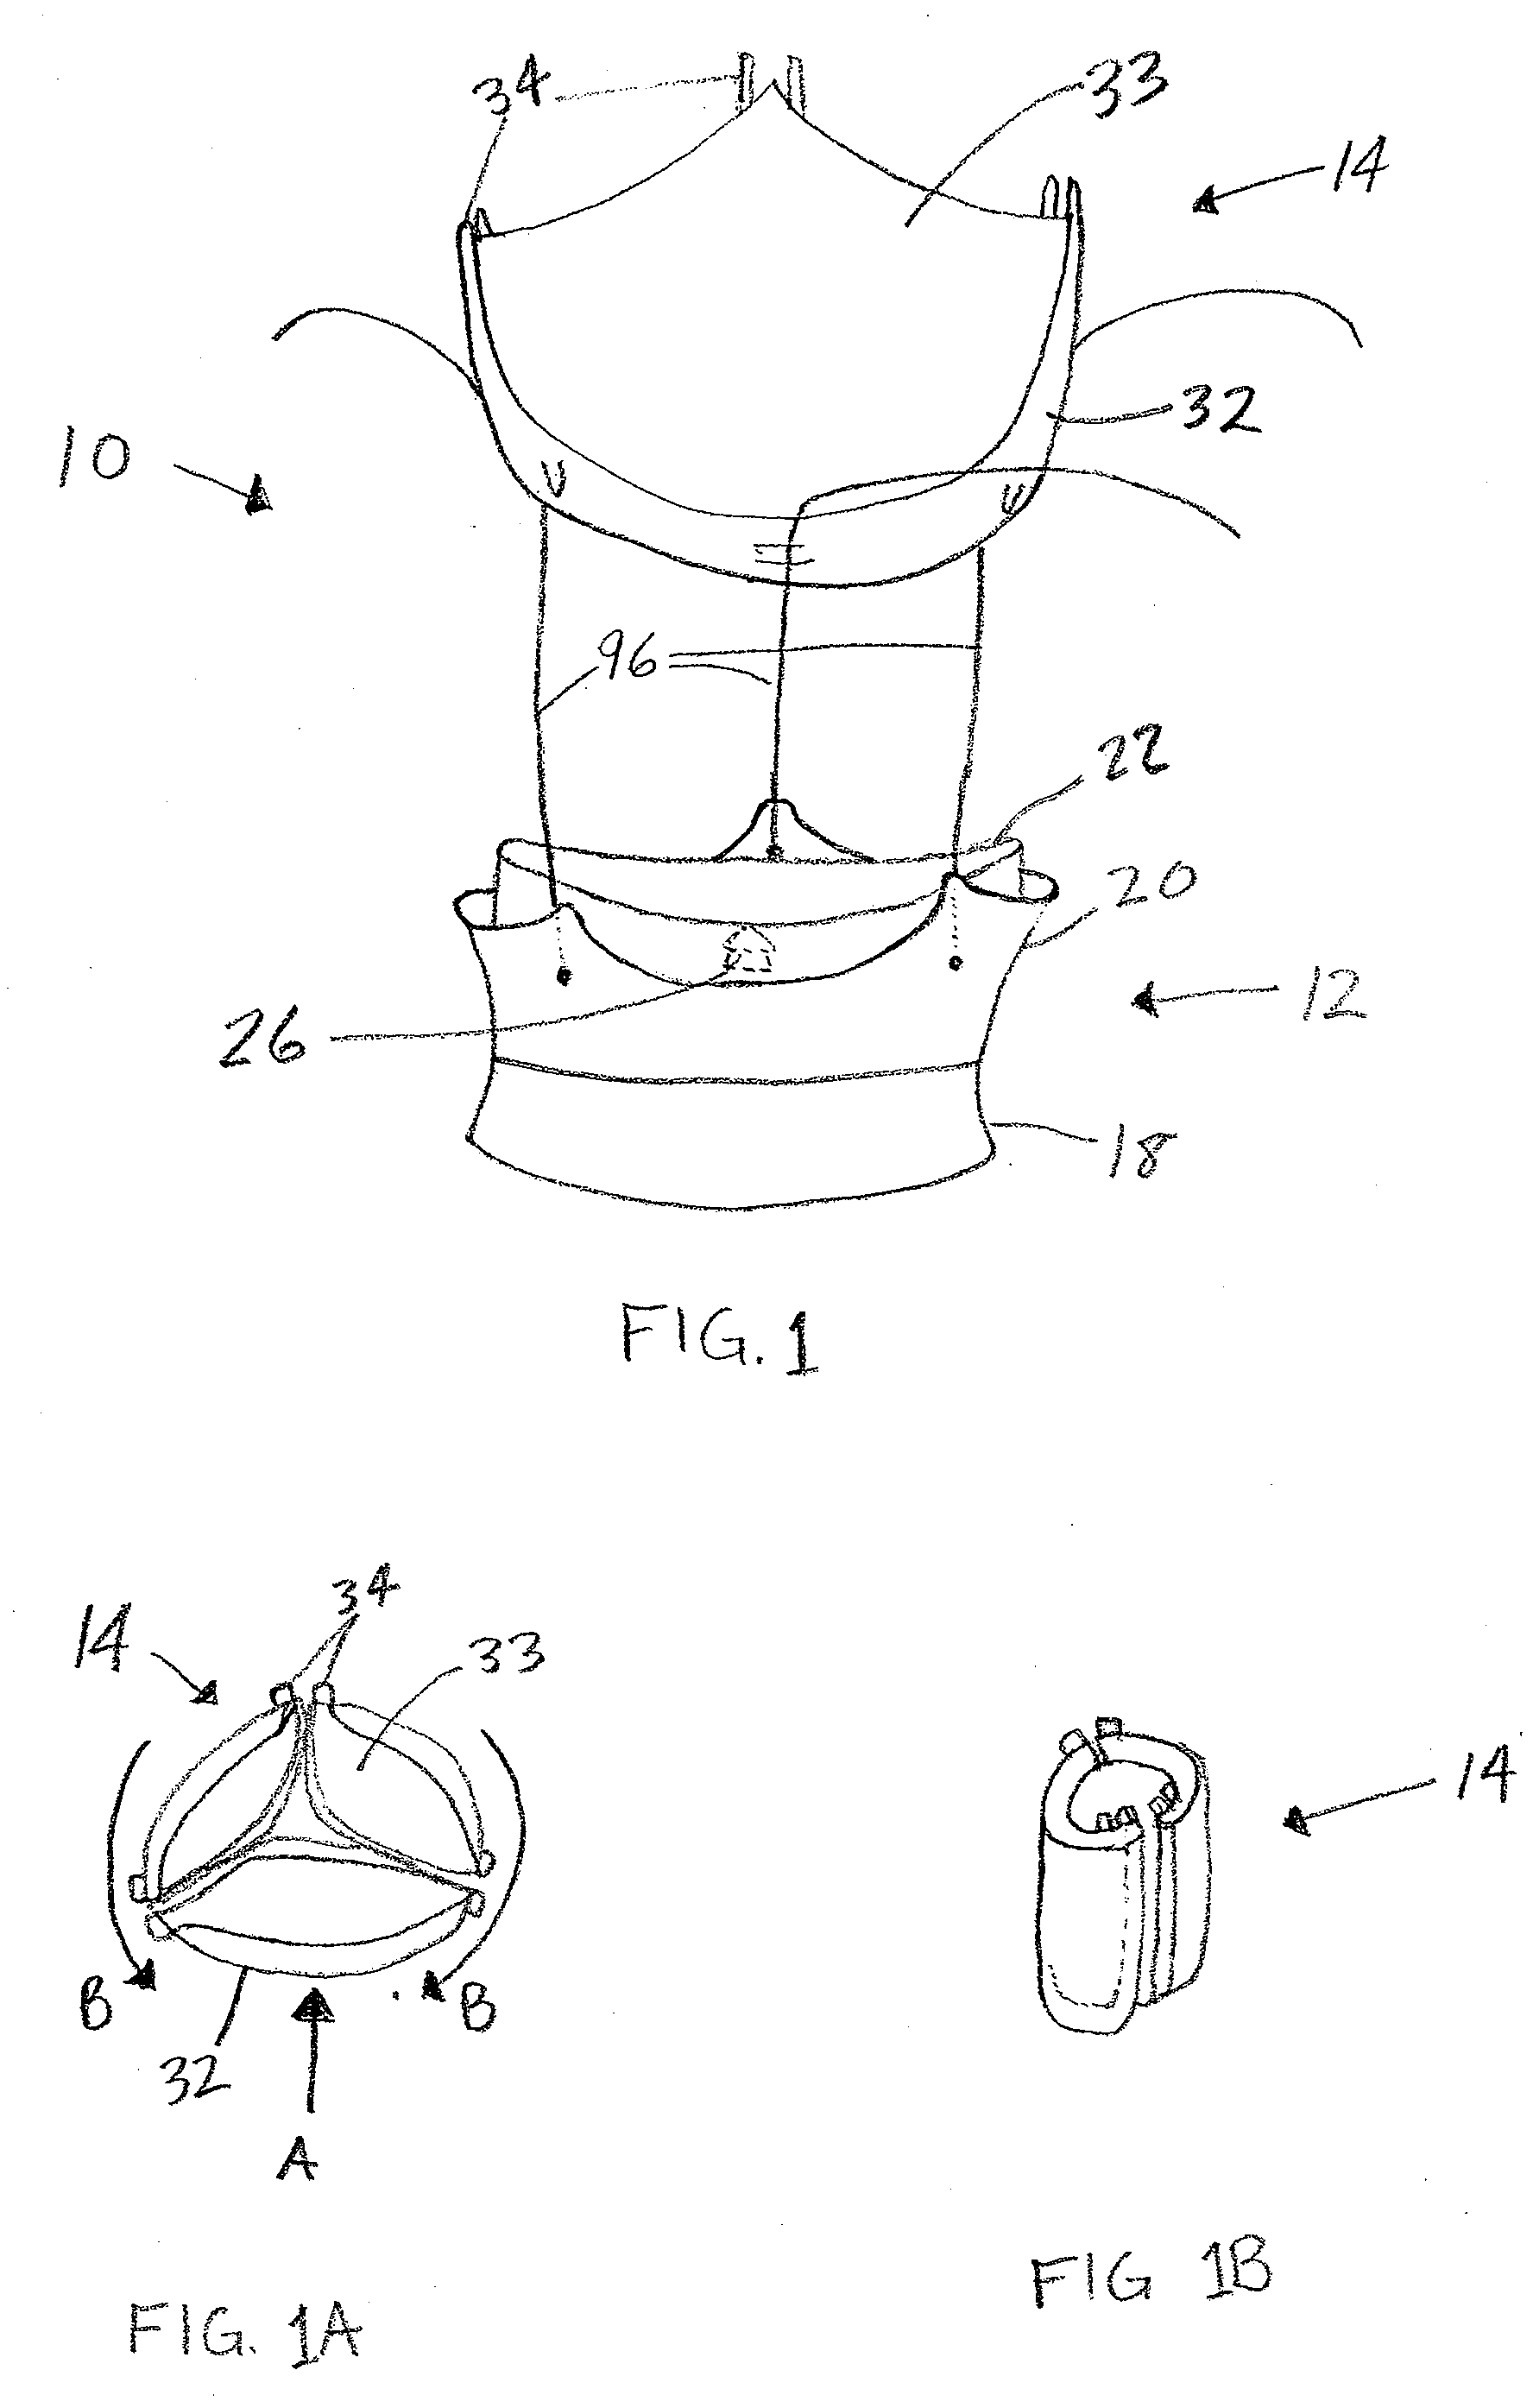 Two-piece percutaneous prosthetic heart valves and methods for making and using them